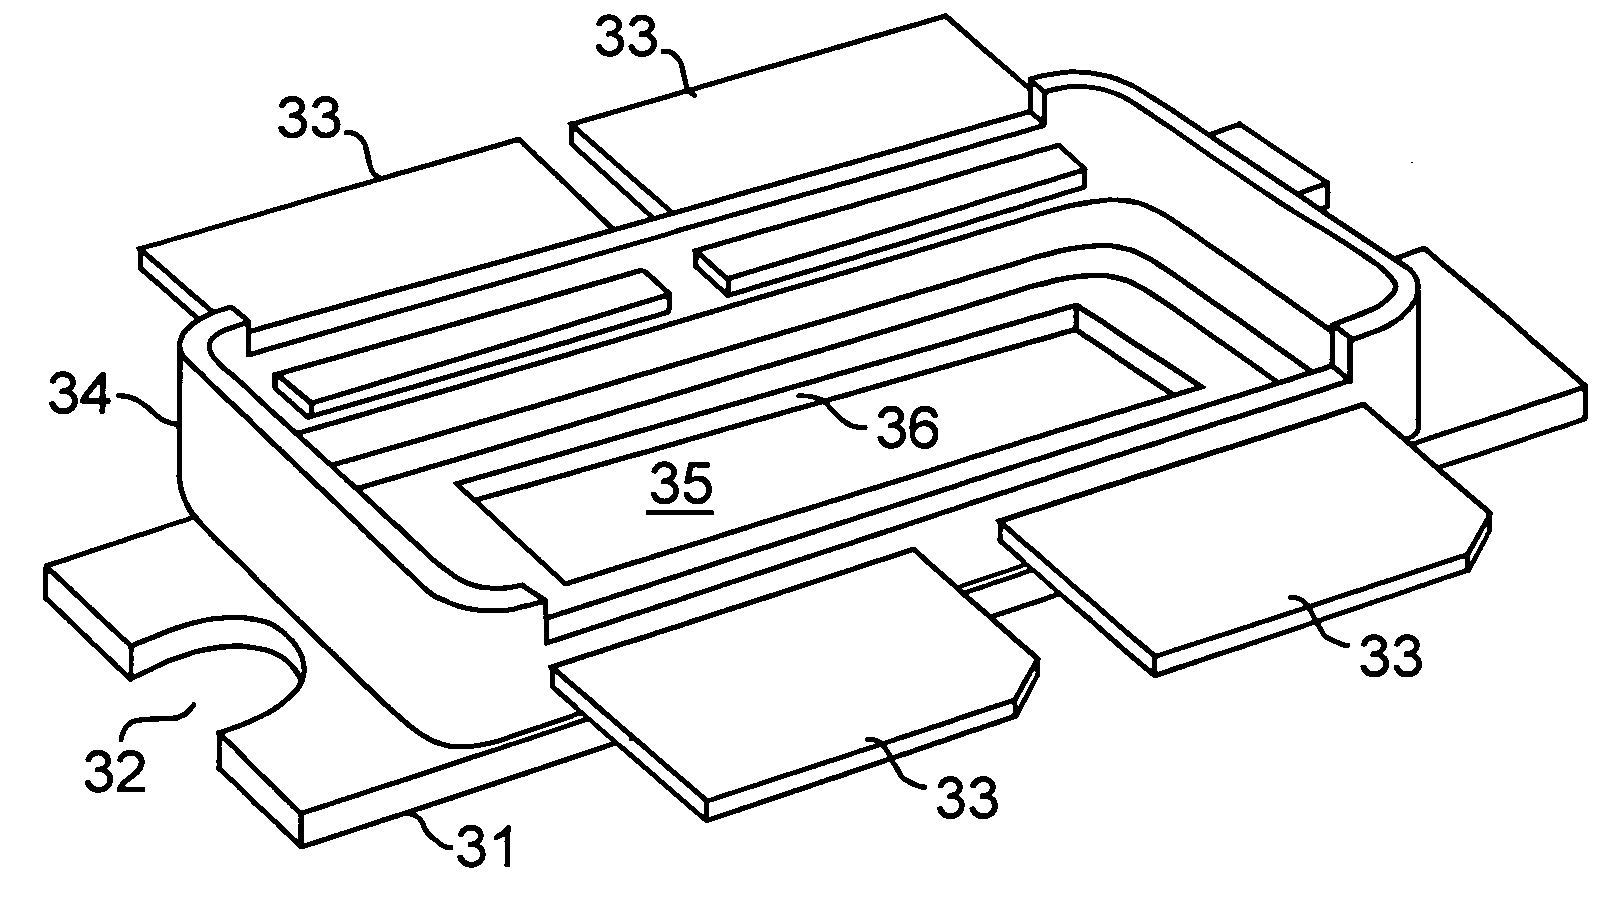 Leadframe designs for integrated circuit plastic packages